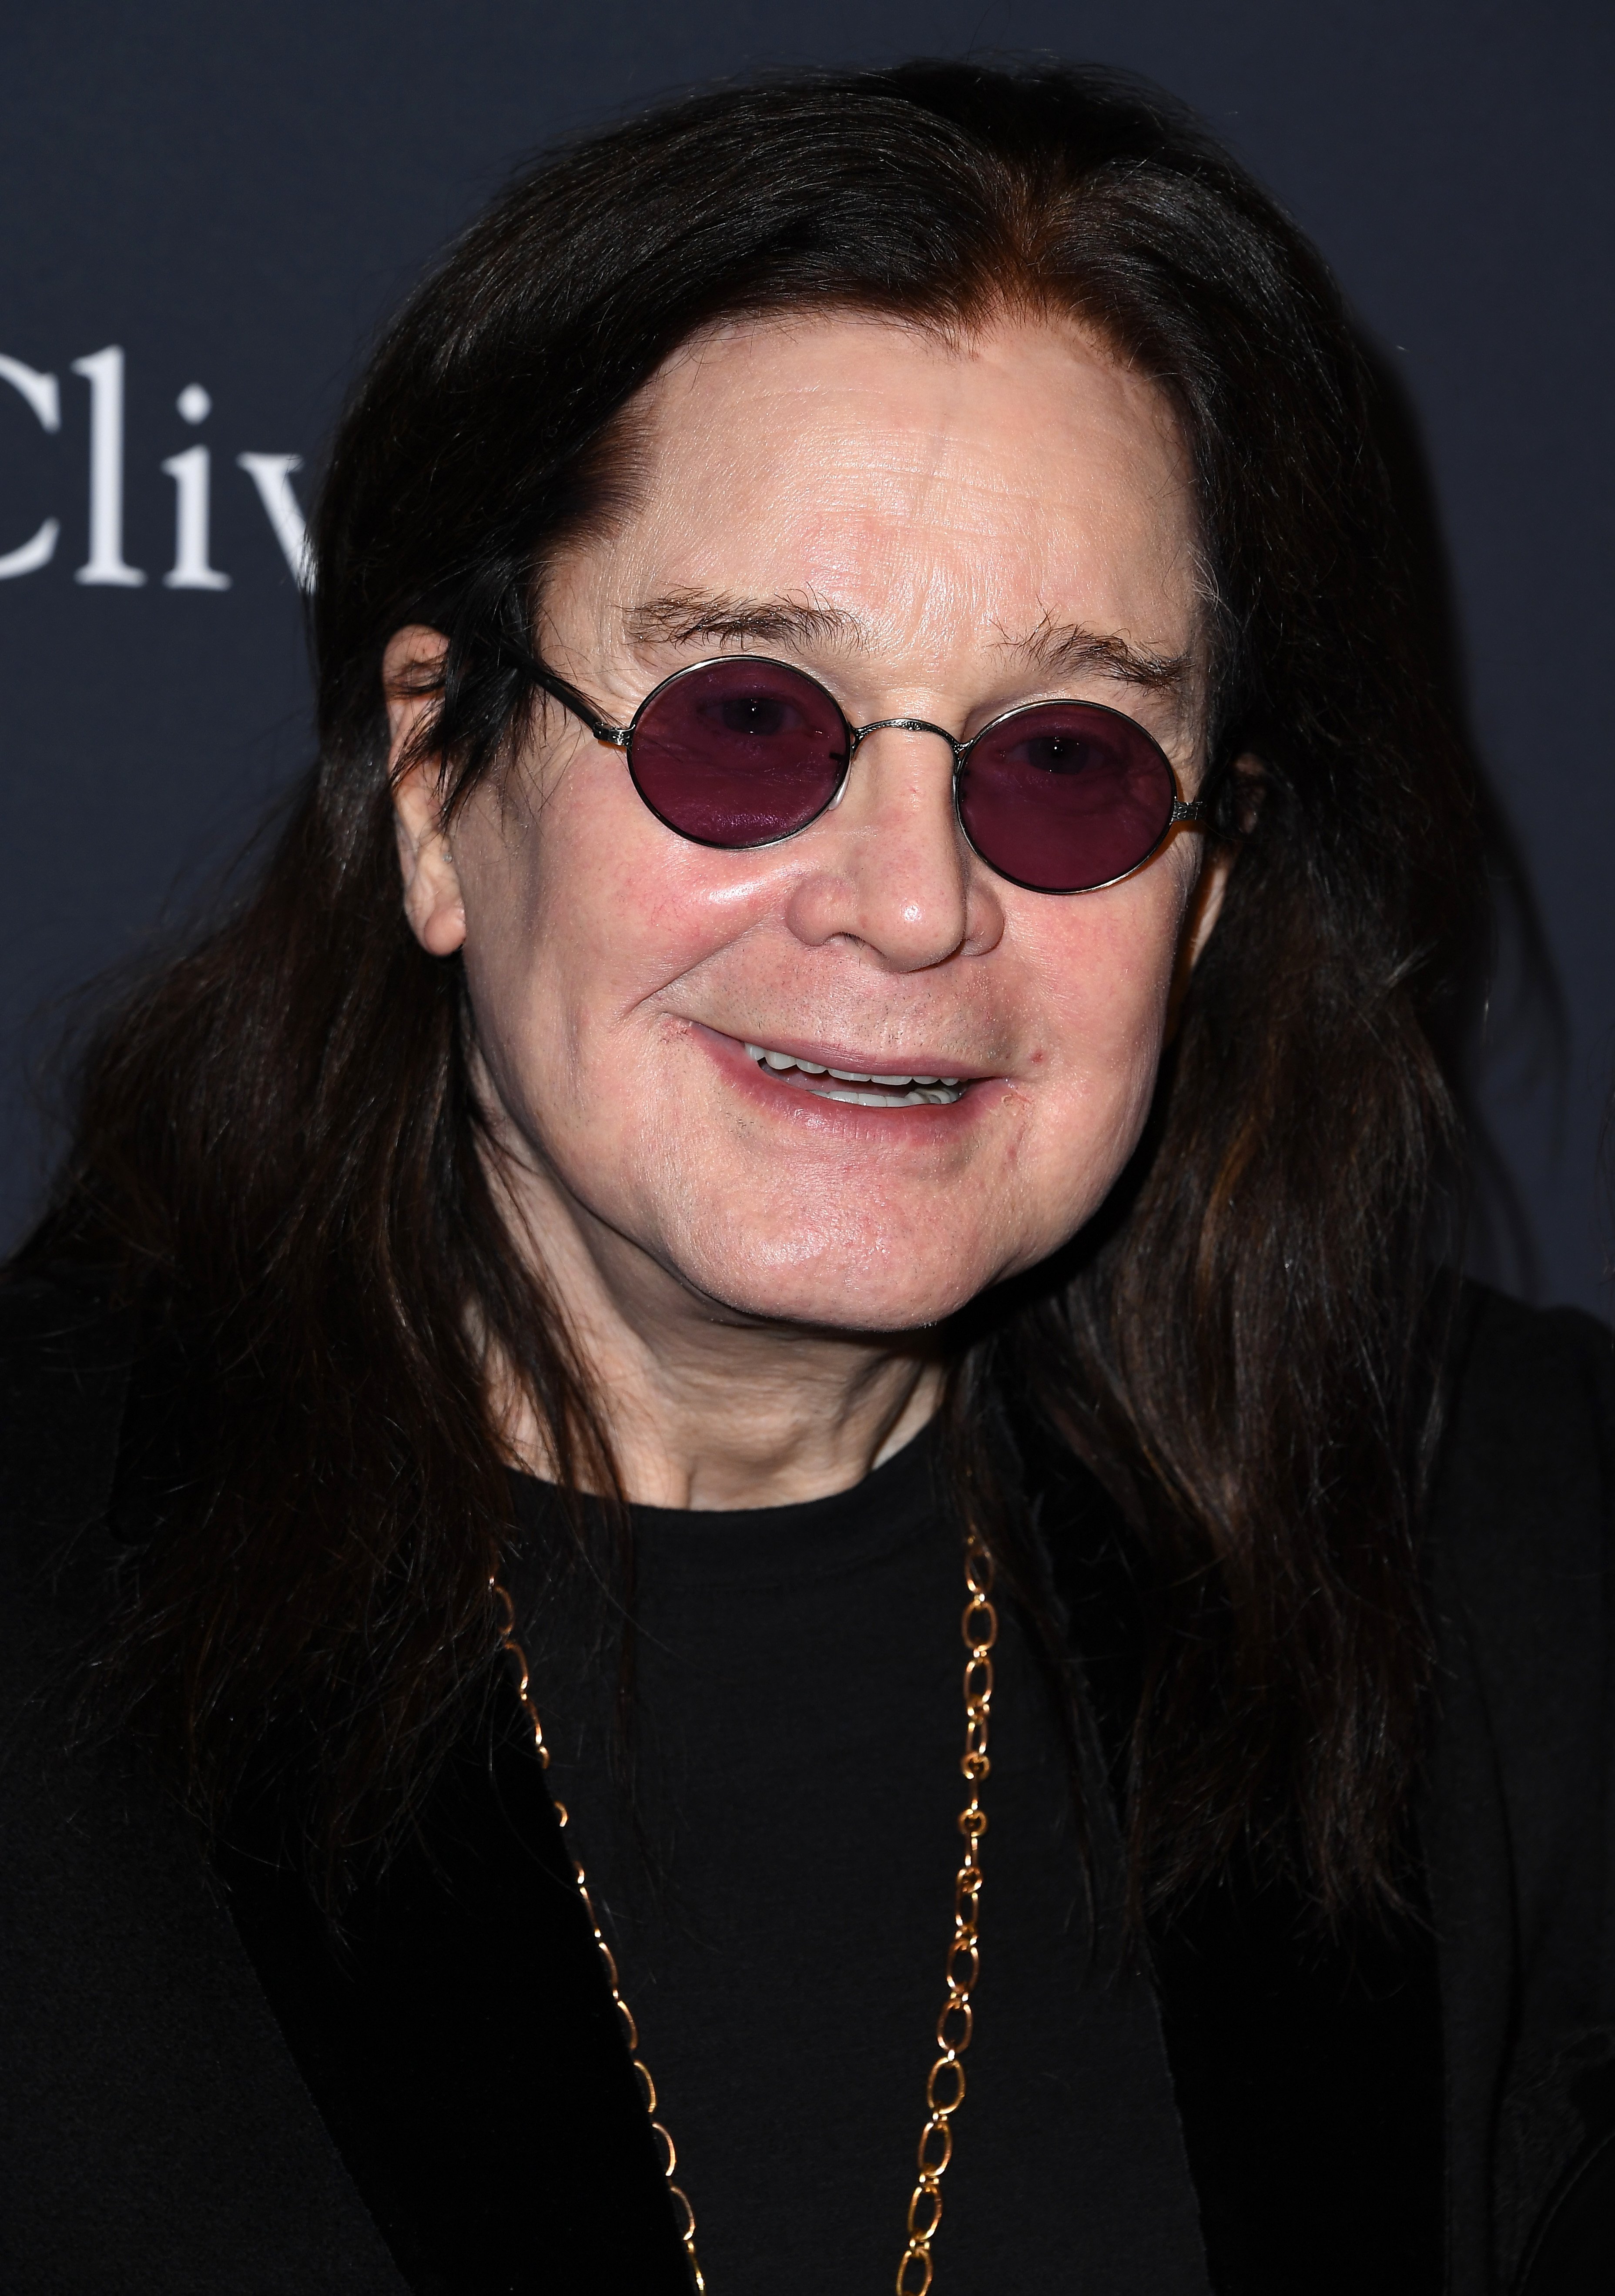 Ozzy Osbourne at the Pre-Grammy Gala and Grammy Salute to Industry Icons Honoring Sean "Diddy" Combs on January 25, 2020, in California. | Source: Getty Images